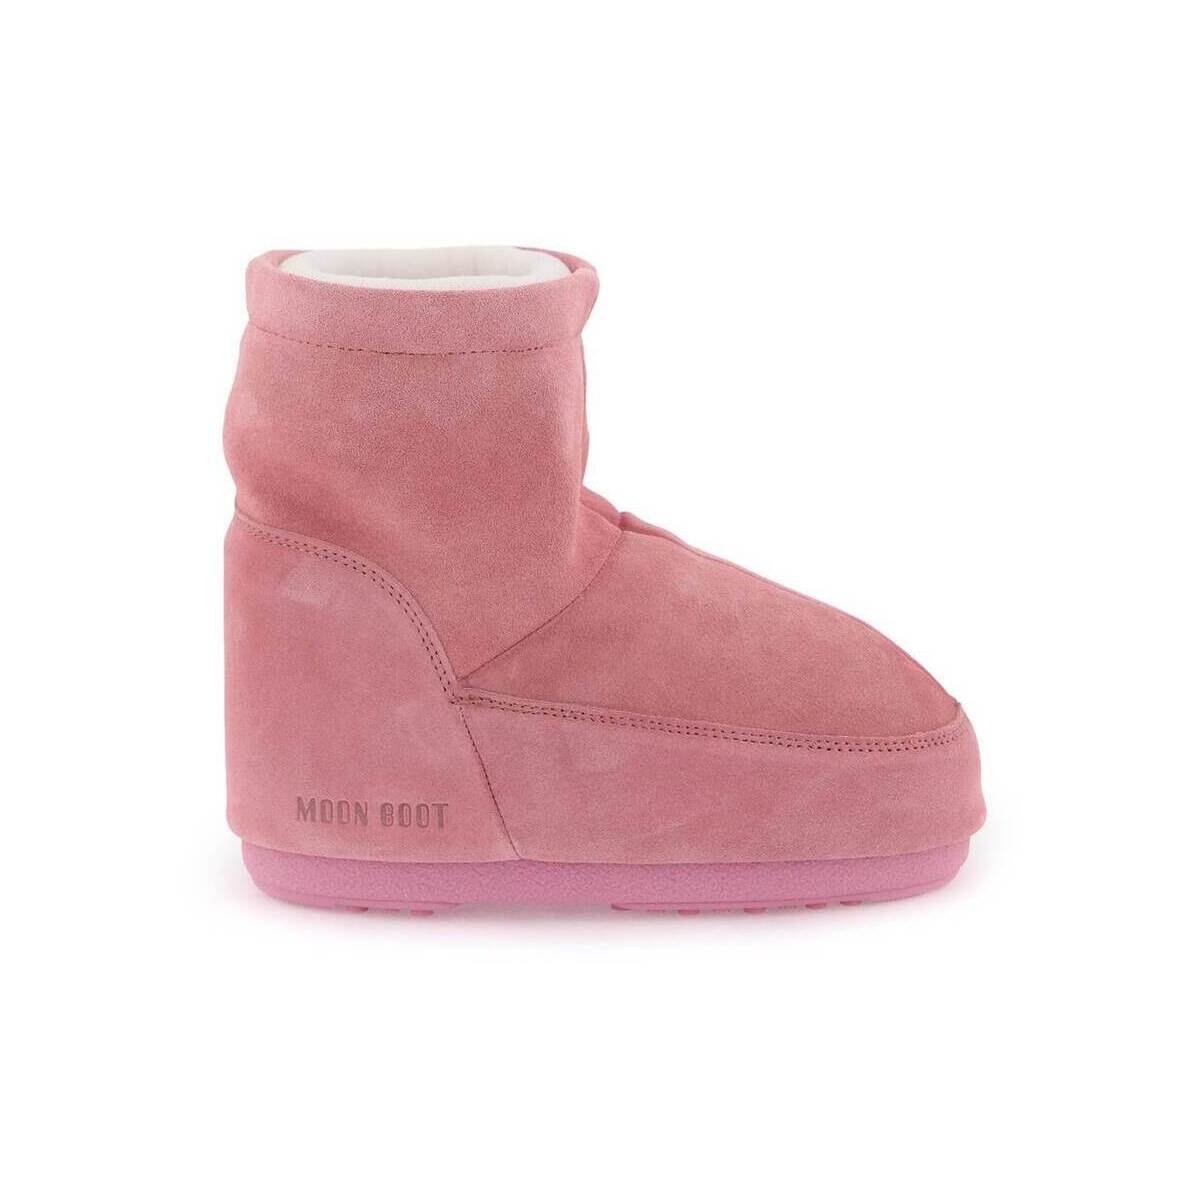 MOON BOOT ムーンブーツ ピンク Rosa Moon boot icon low suede snow boots ブーツ レディース 秋冬2023 14094000 【関税・送料無料】【ラッピング無料】 ik